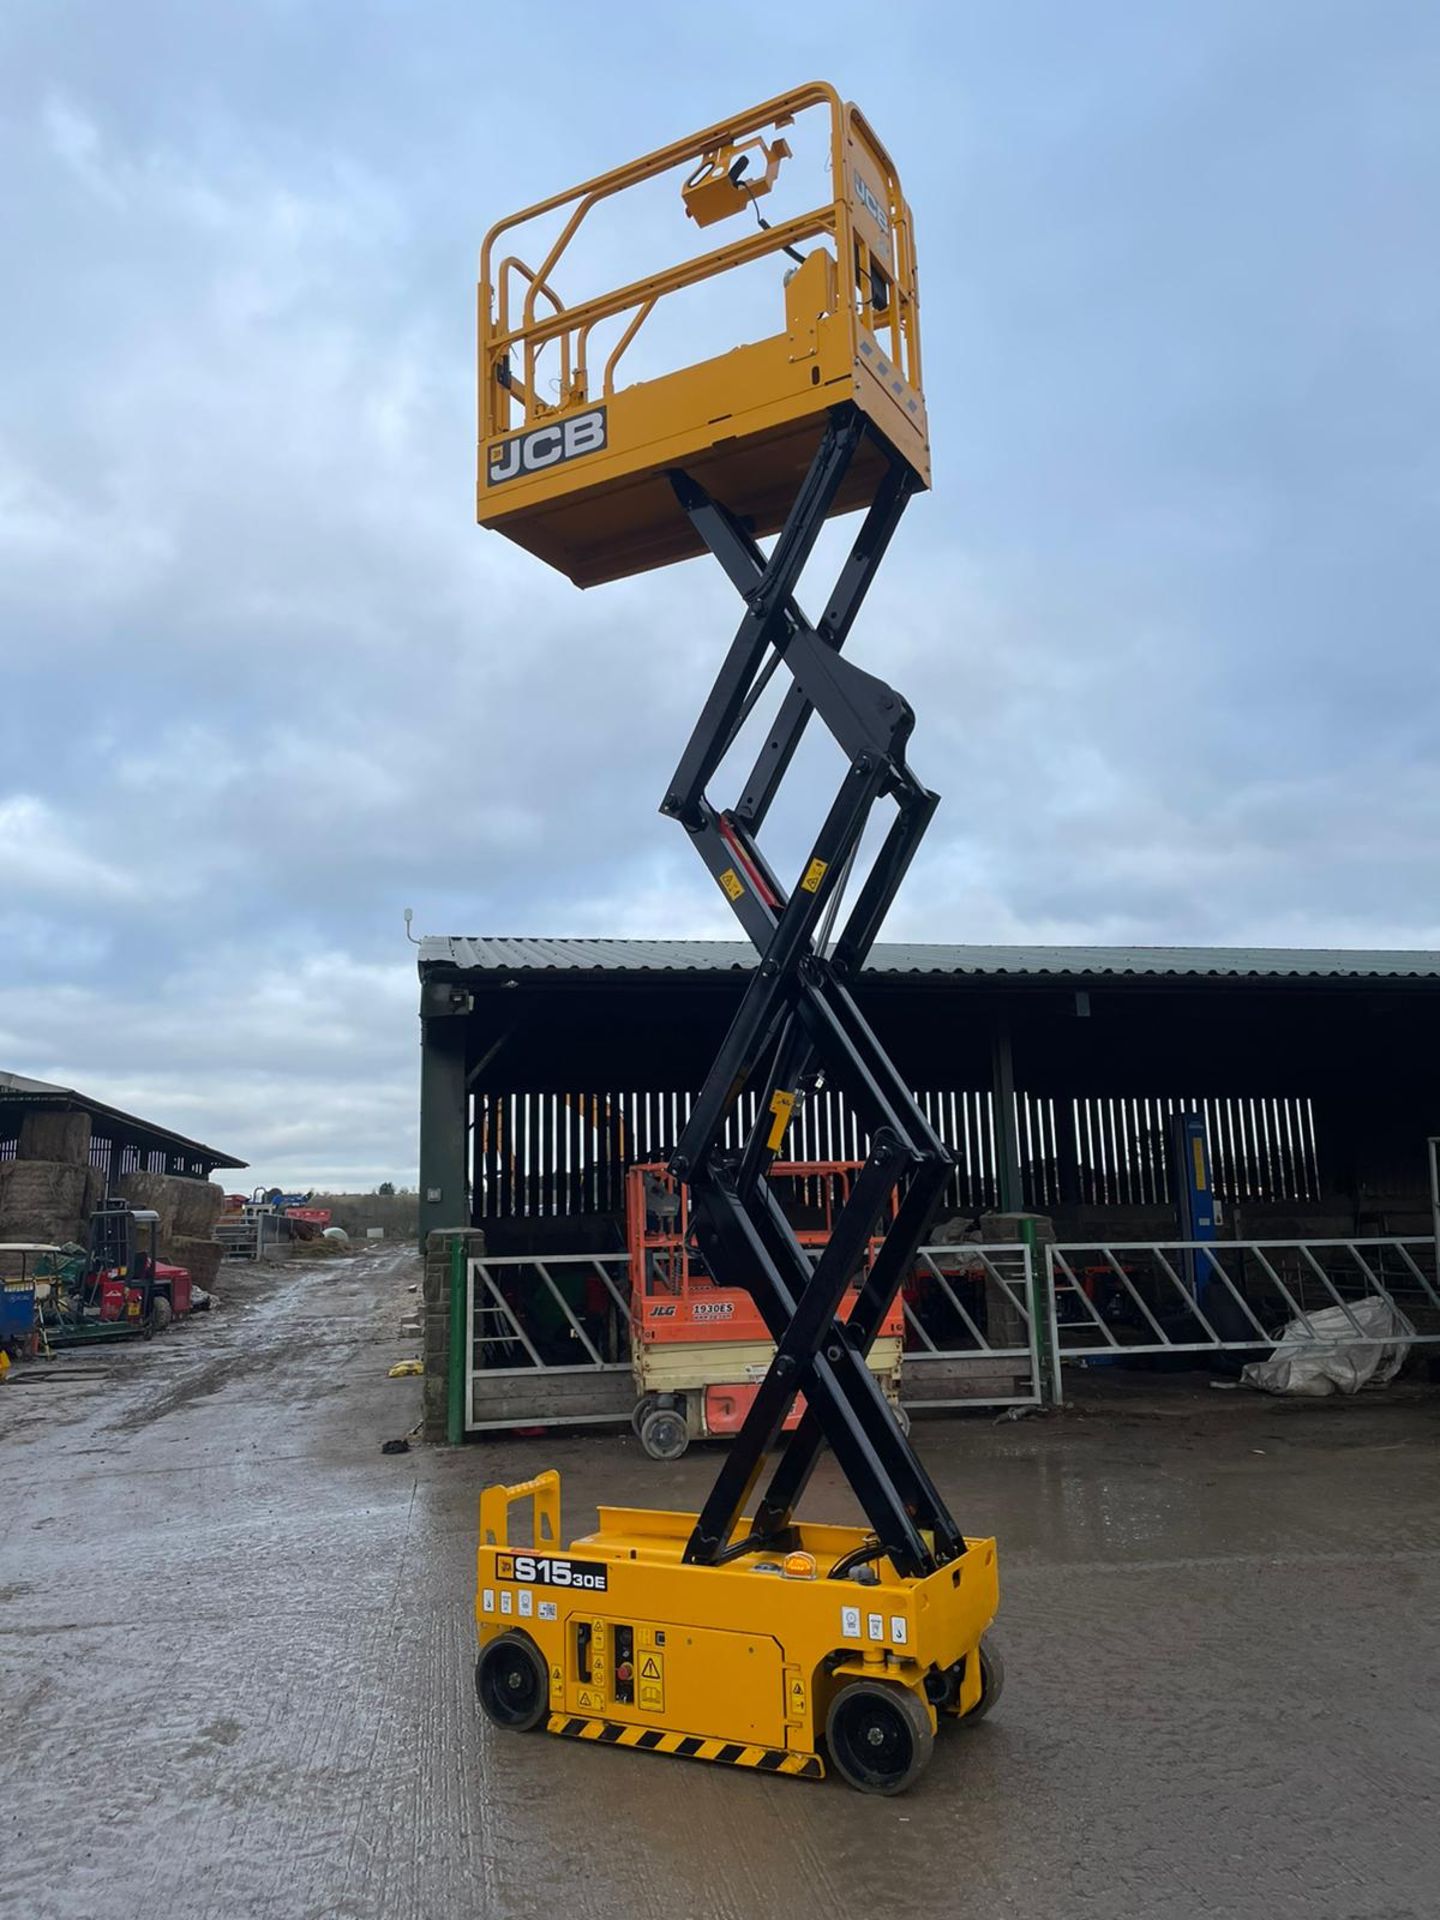 2019 JCB S1530E ELECTRIC SCISSOR LIFT, as new - EX DEMO CONDITION 3 hrs only *PLUS VAT* - Image 2 of 5